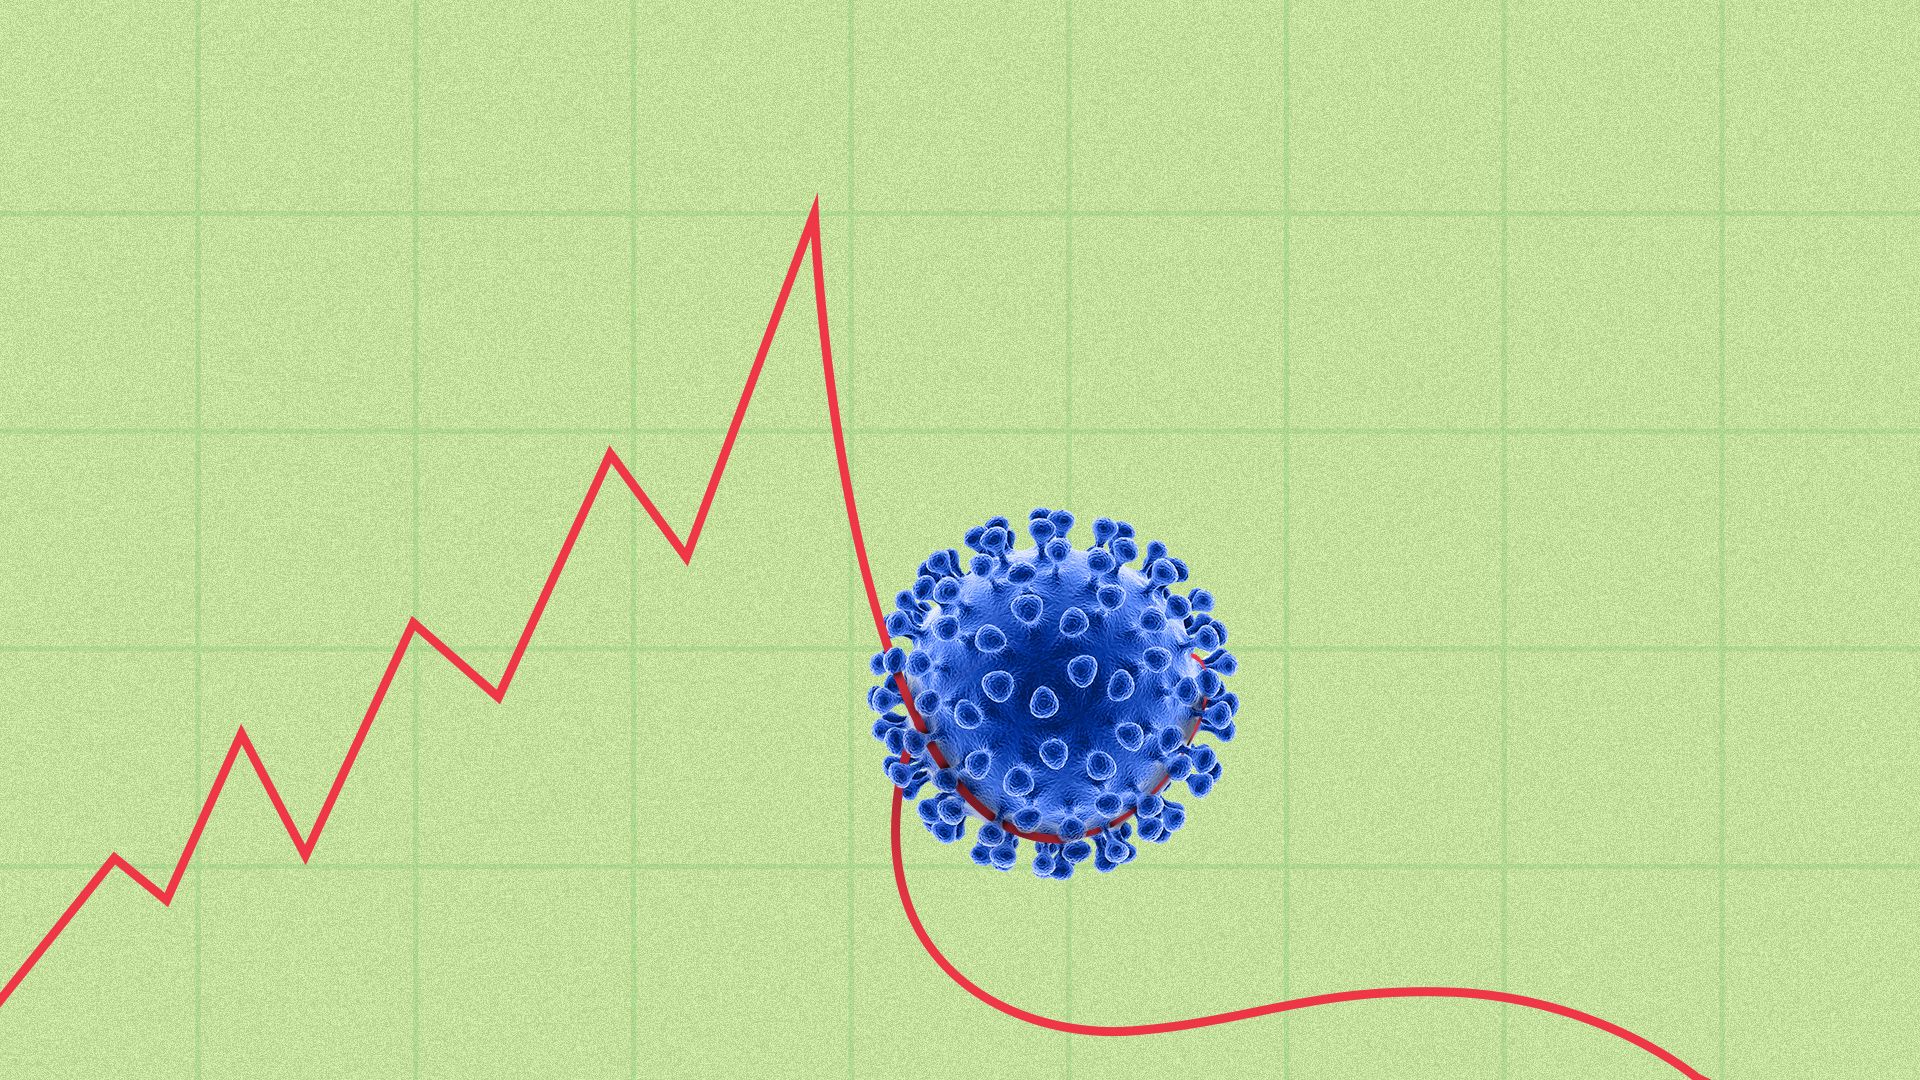 Illustration of a virus cell landing on an upward trending line and weighing it down